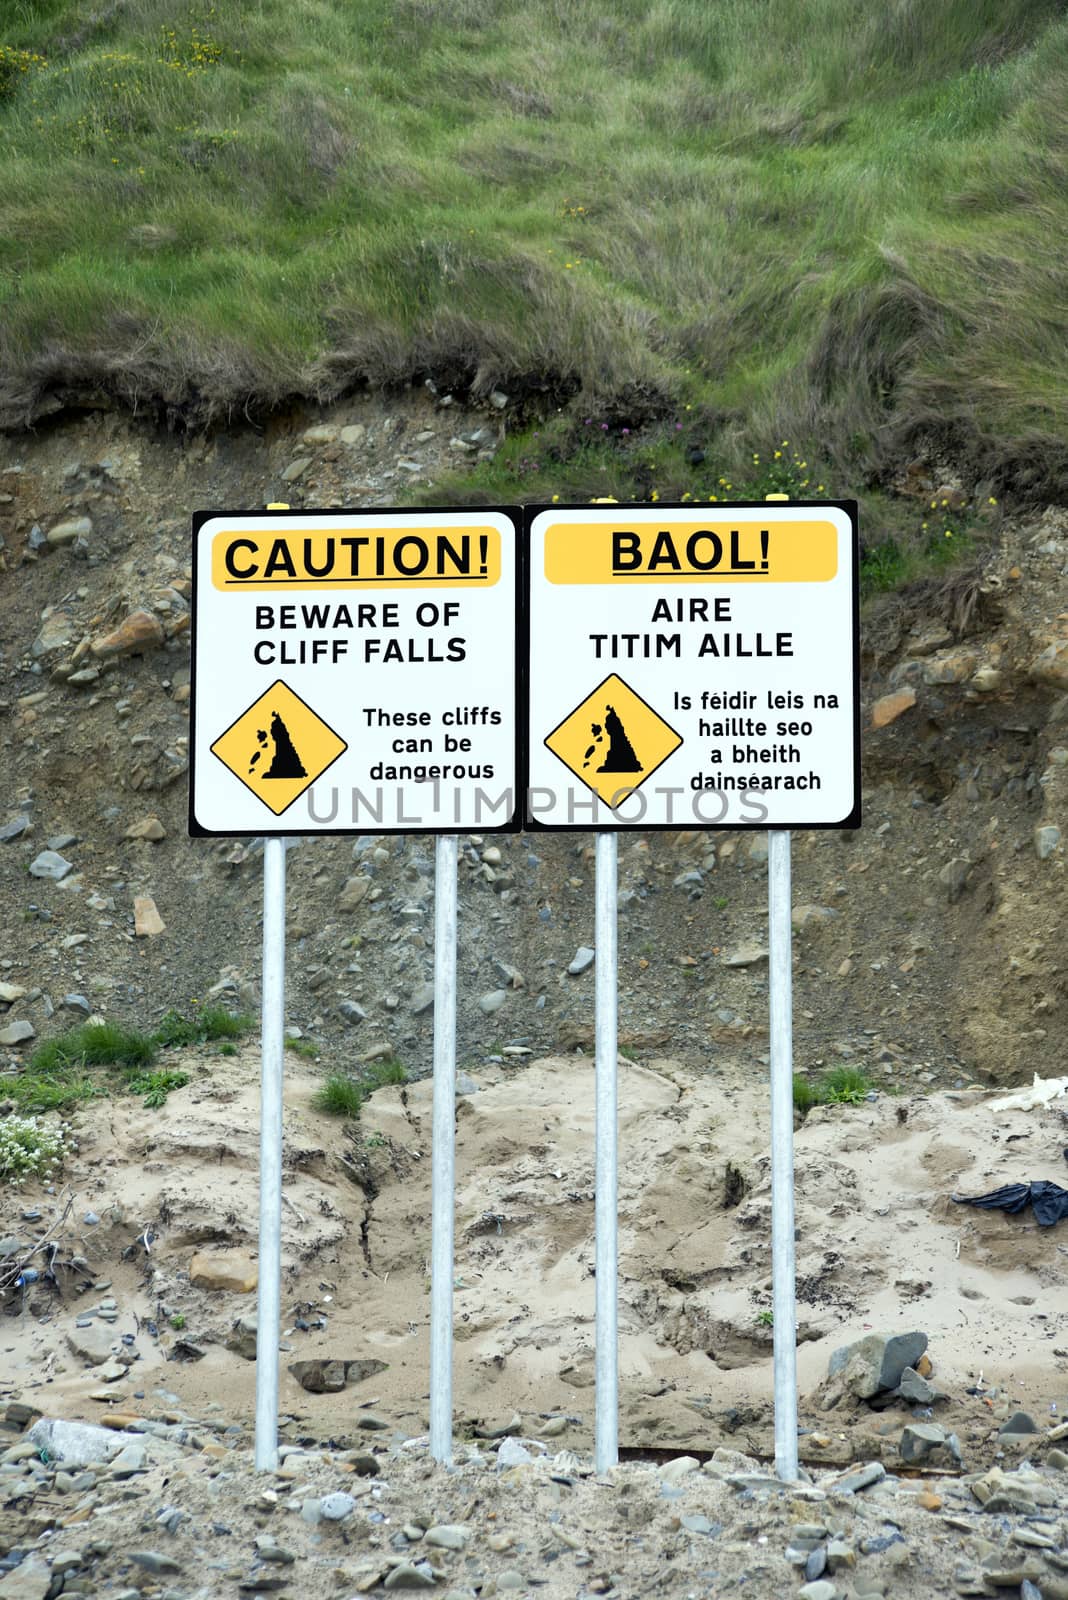 beware of cliff falls signs on ballybunion beach in county kerry ireland